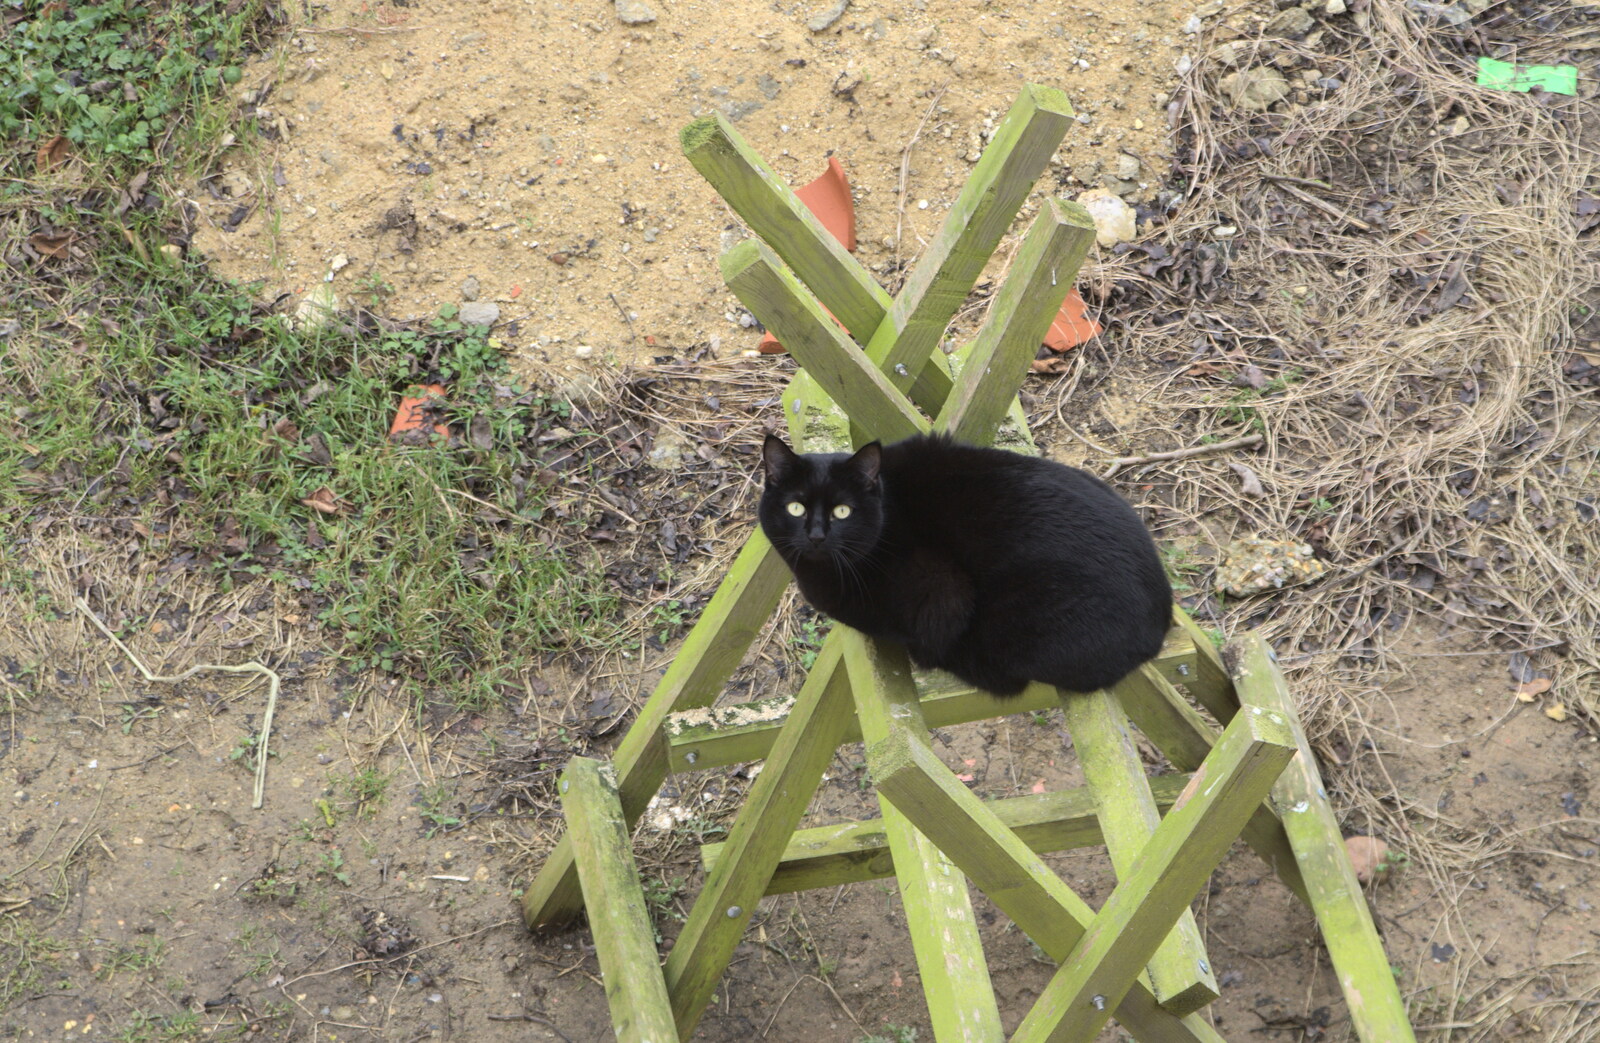 Millie-cat perches on a saw horse from Fred and the Volcano, Brome, Suffolk - 8th February 2015